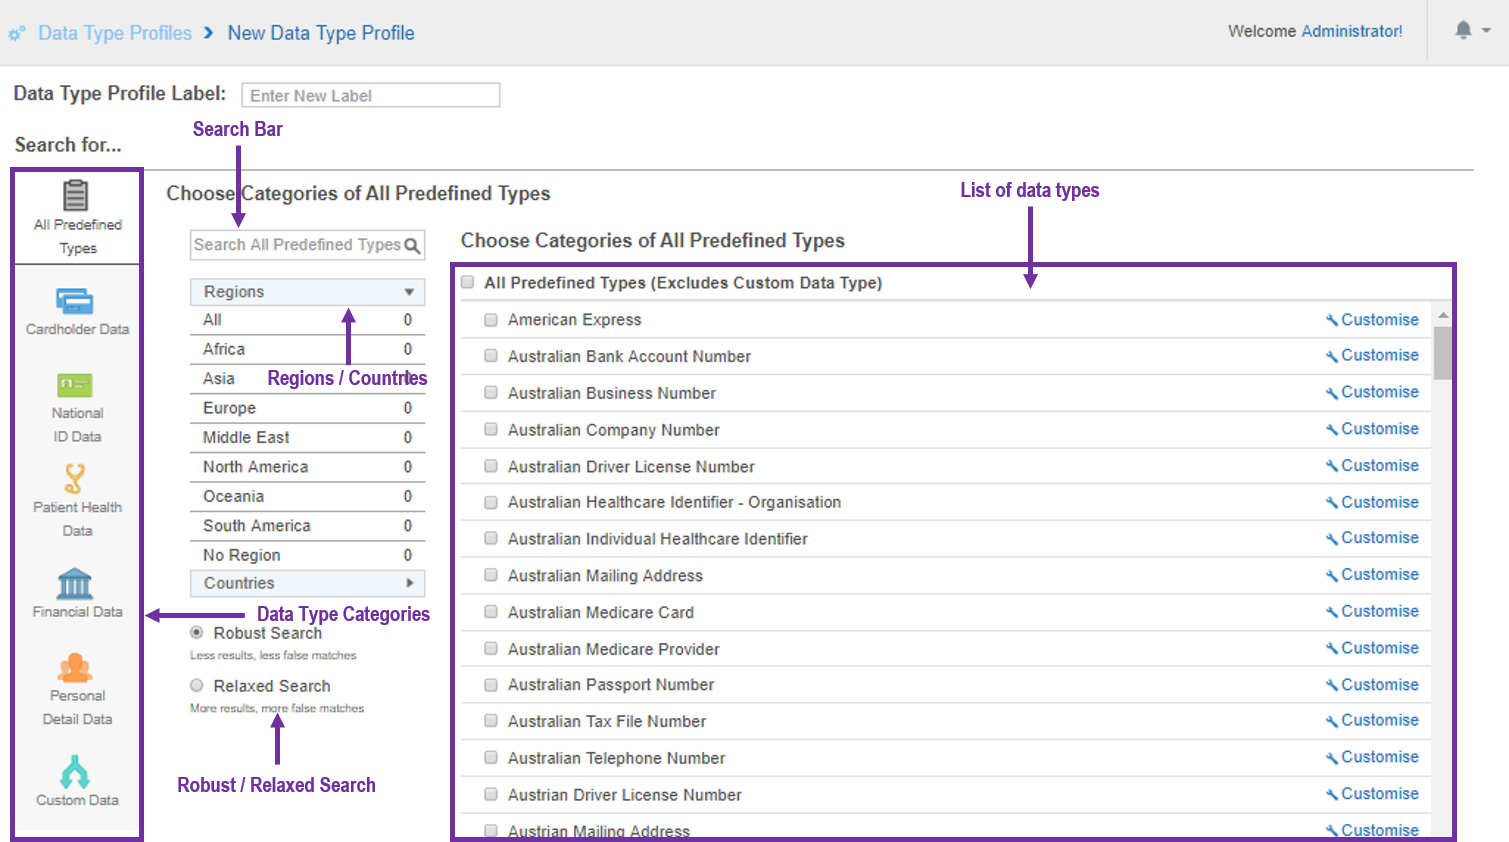 Add a new version of an existing data type profile.